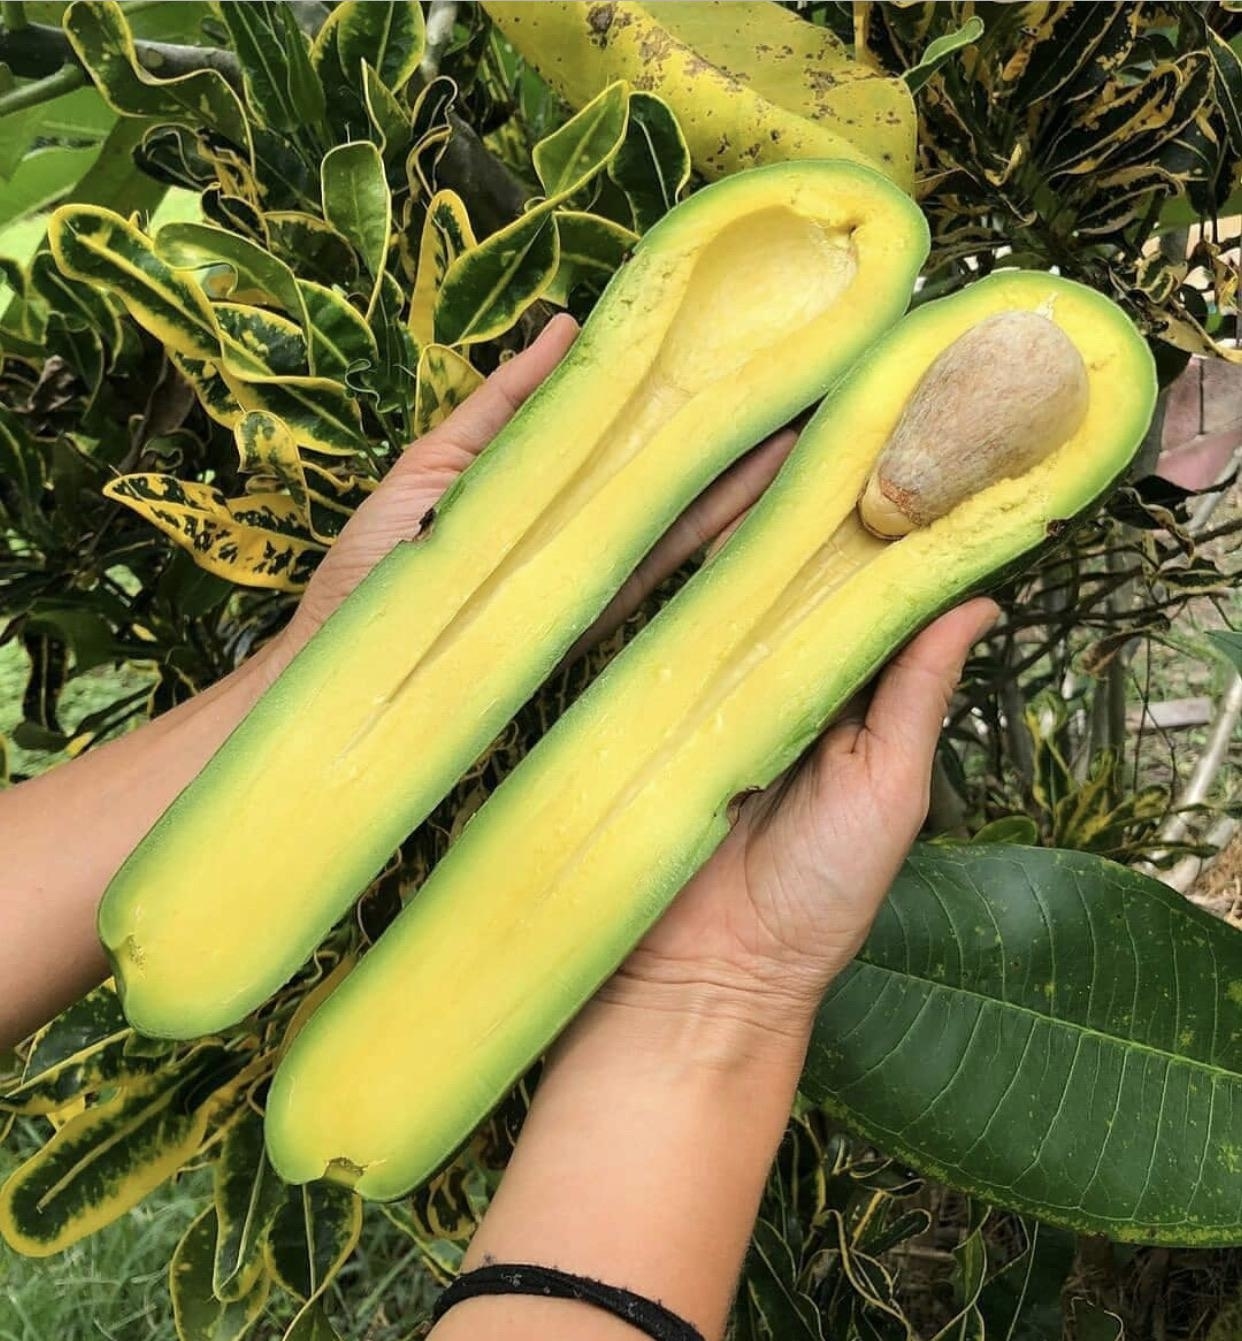 A person holding extremely elongated, ripe avocado halves with the seed at the top of one half